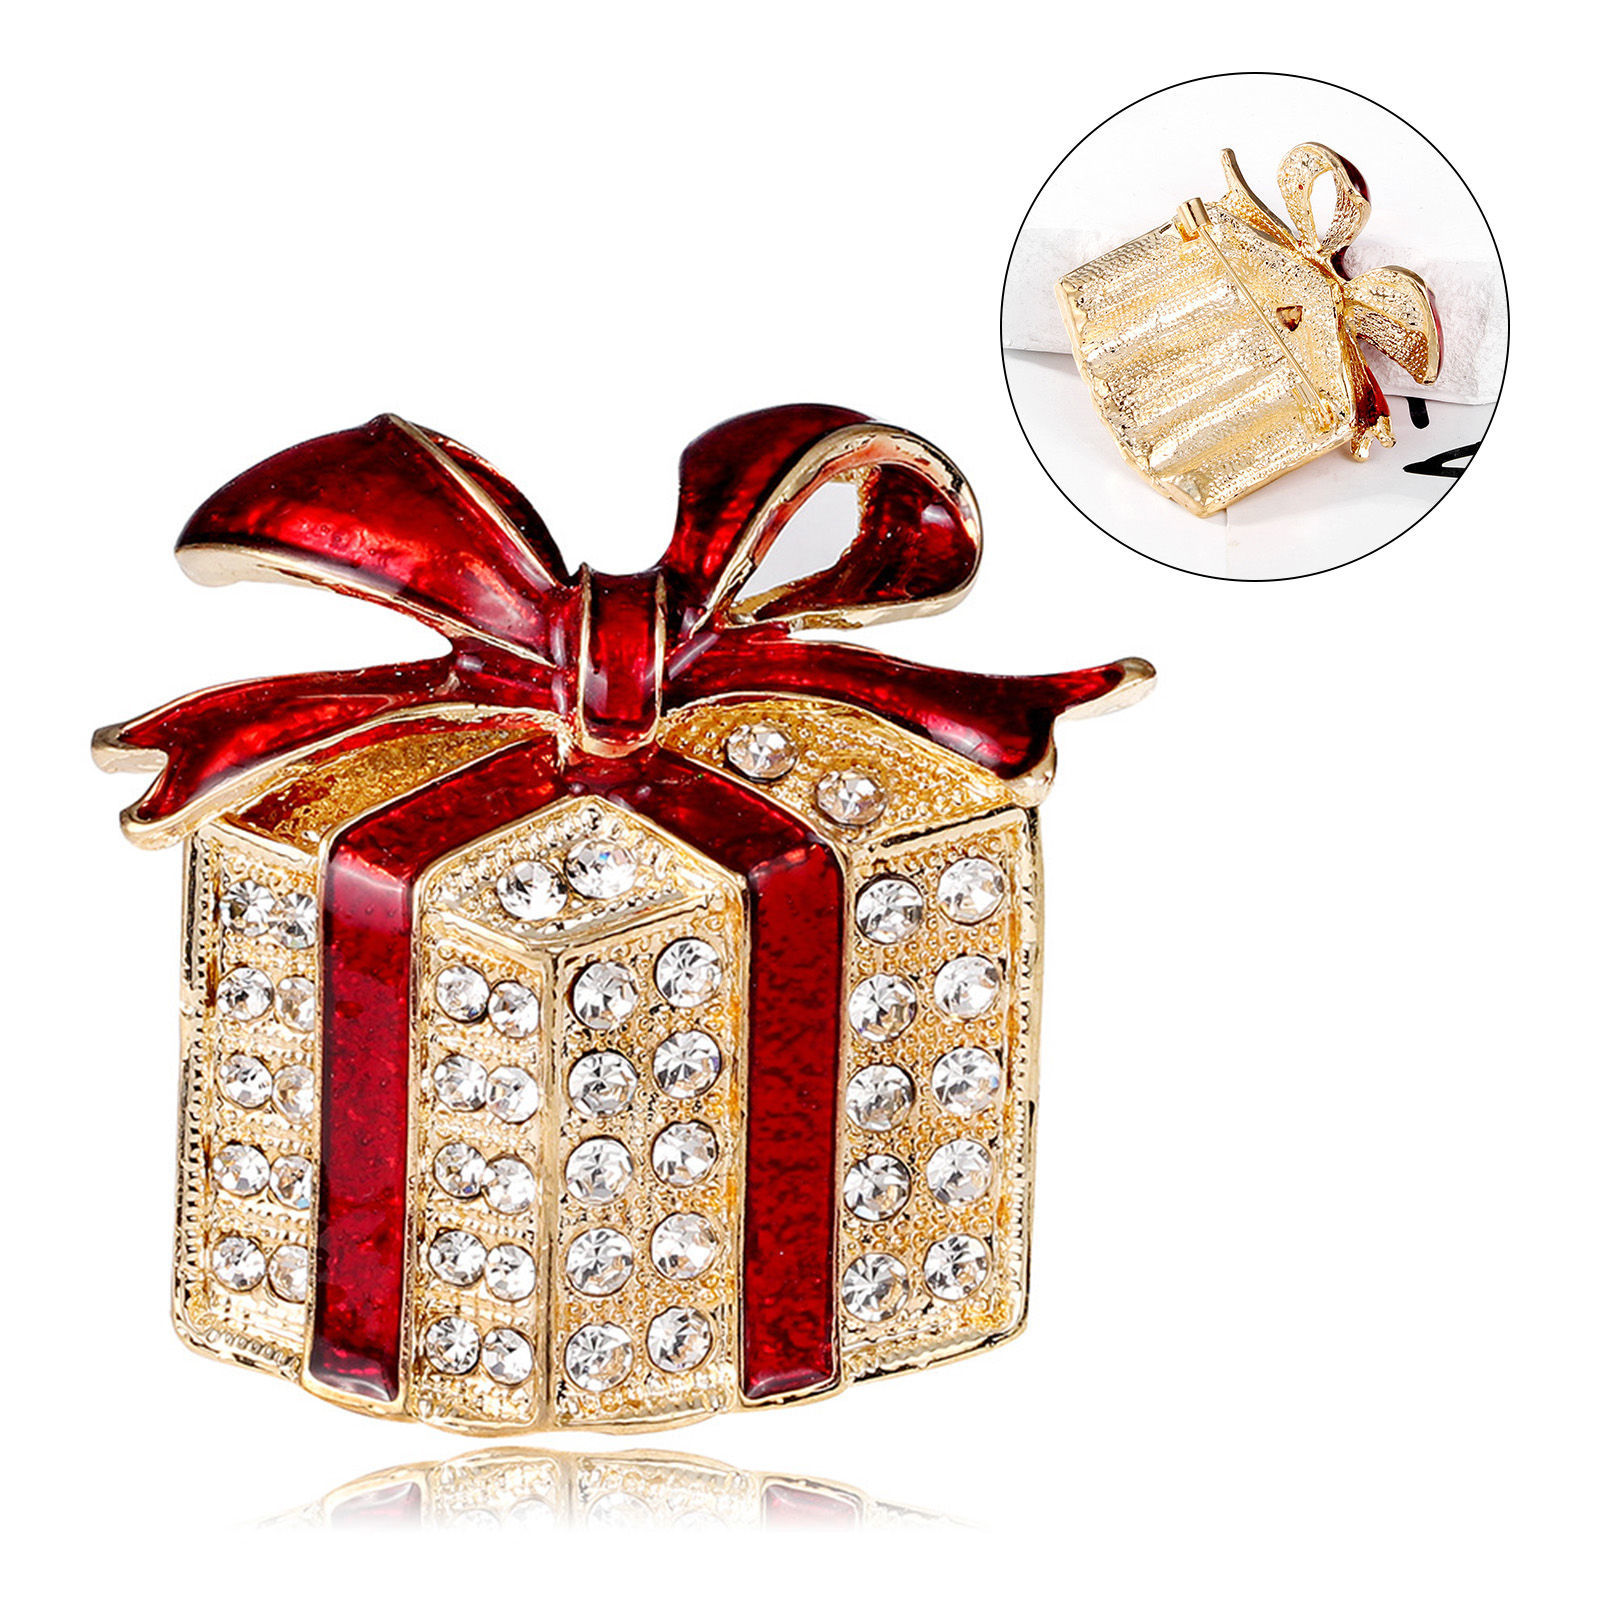 Picture of Retro Pin Brooches Christmas Gift Bag Bowknot Gold Plated Red Enamel Clear Rhinestone 4.3cm x 4.2cm, 1 Piece